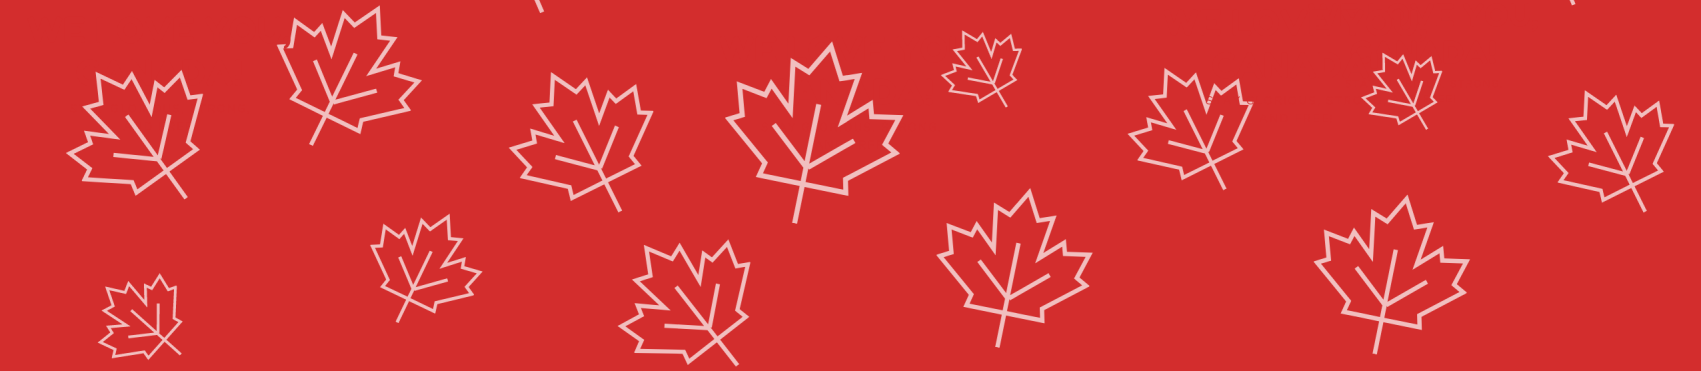 Cream coloured maple leafs on red background.